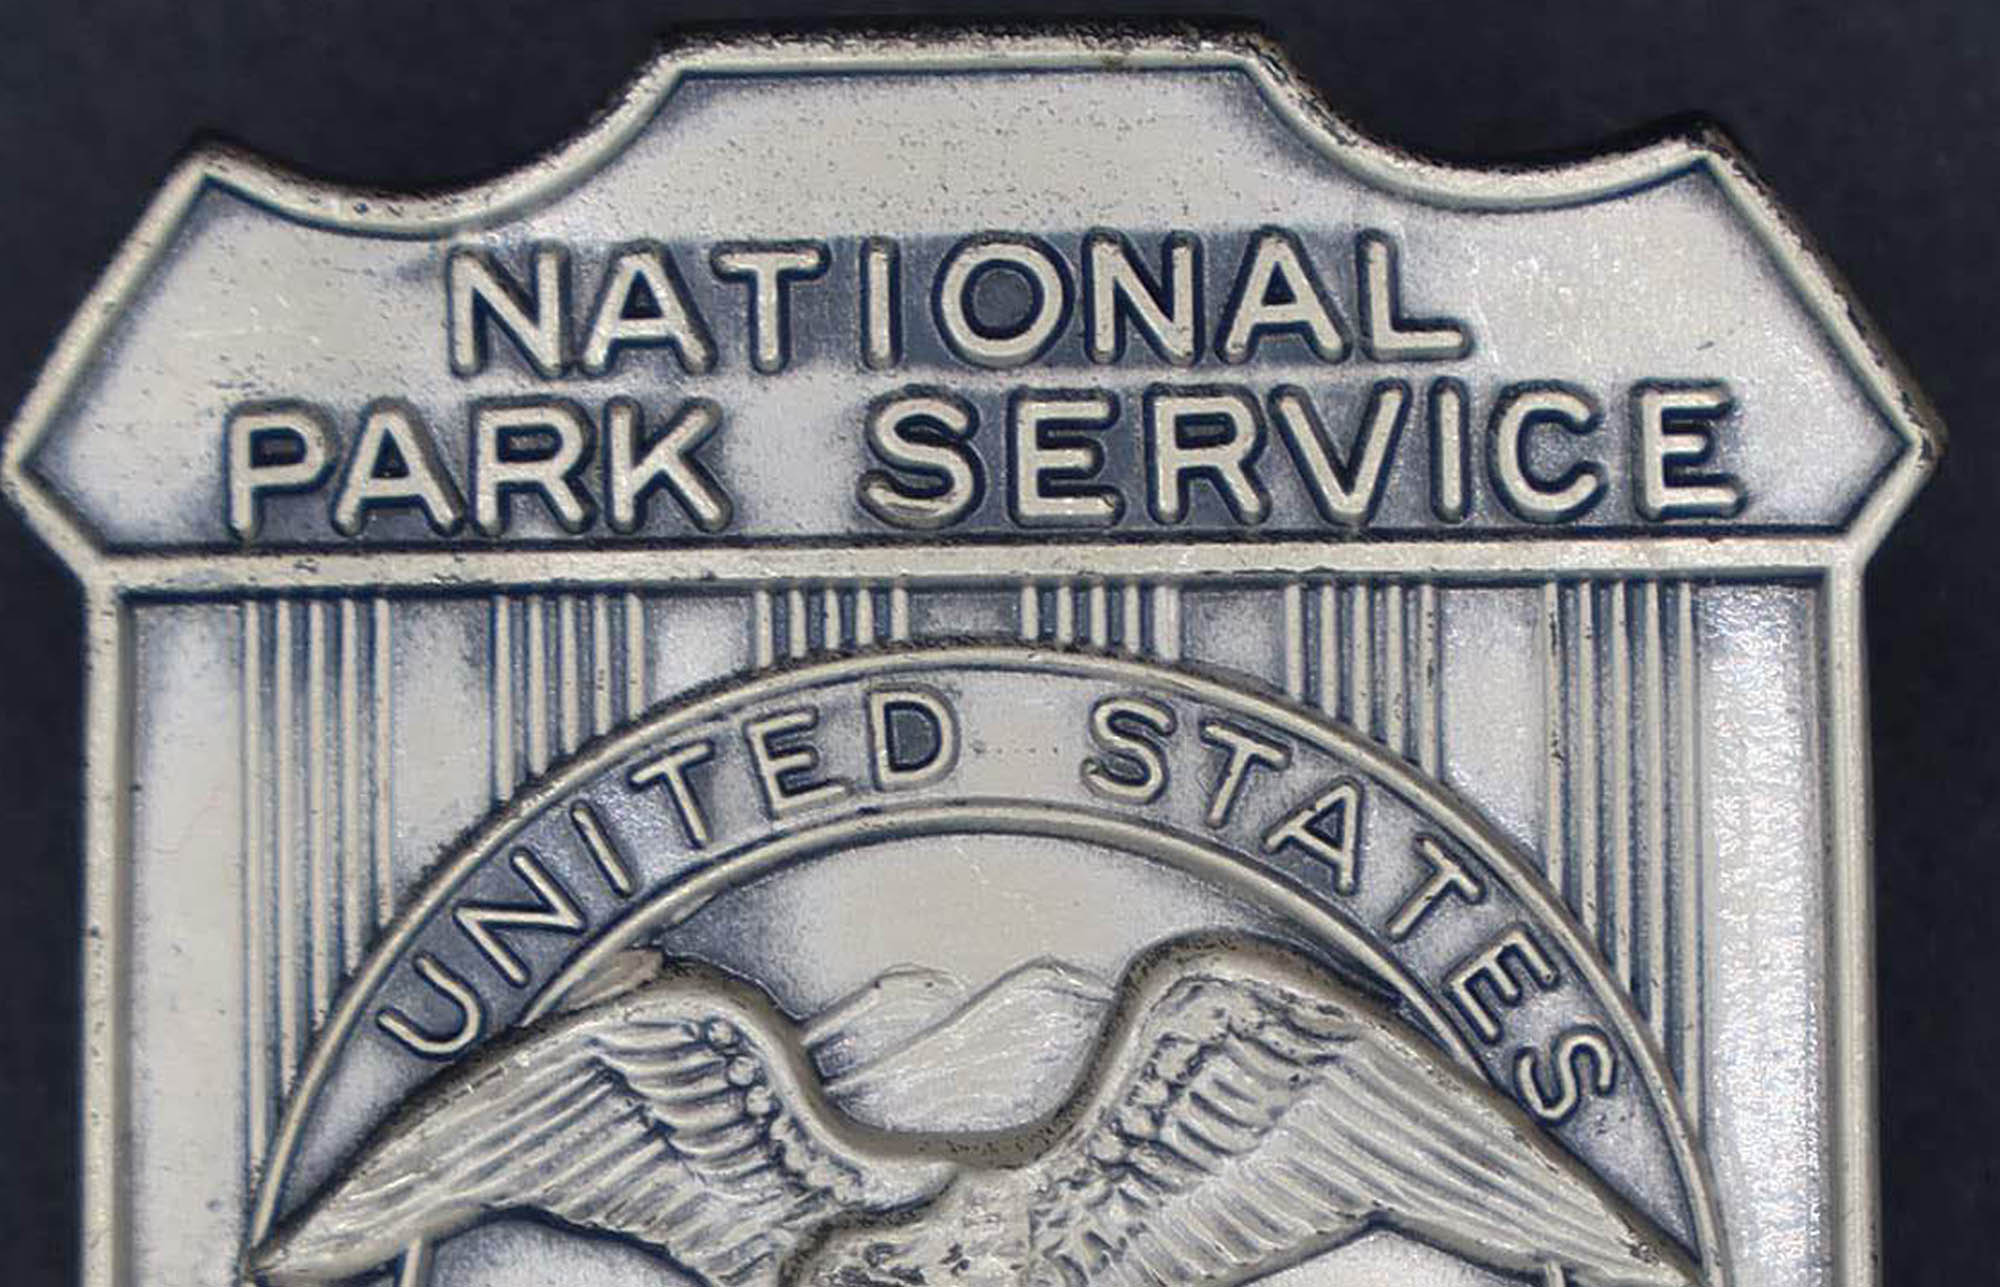 Silver shield-shaped badge marked National Park Service. The round seal in the middle has an eagle looking to its right.